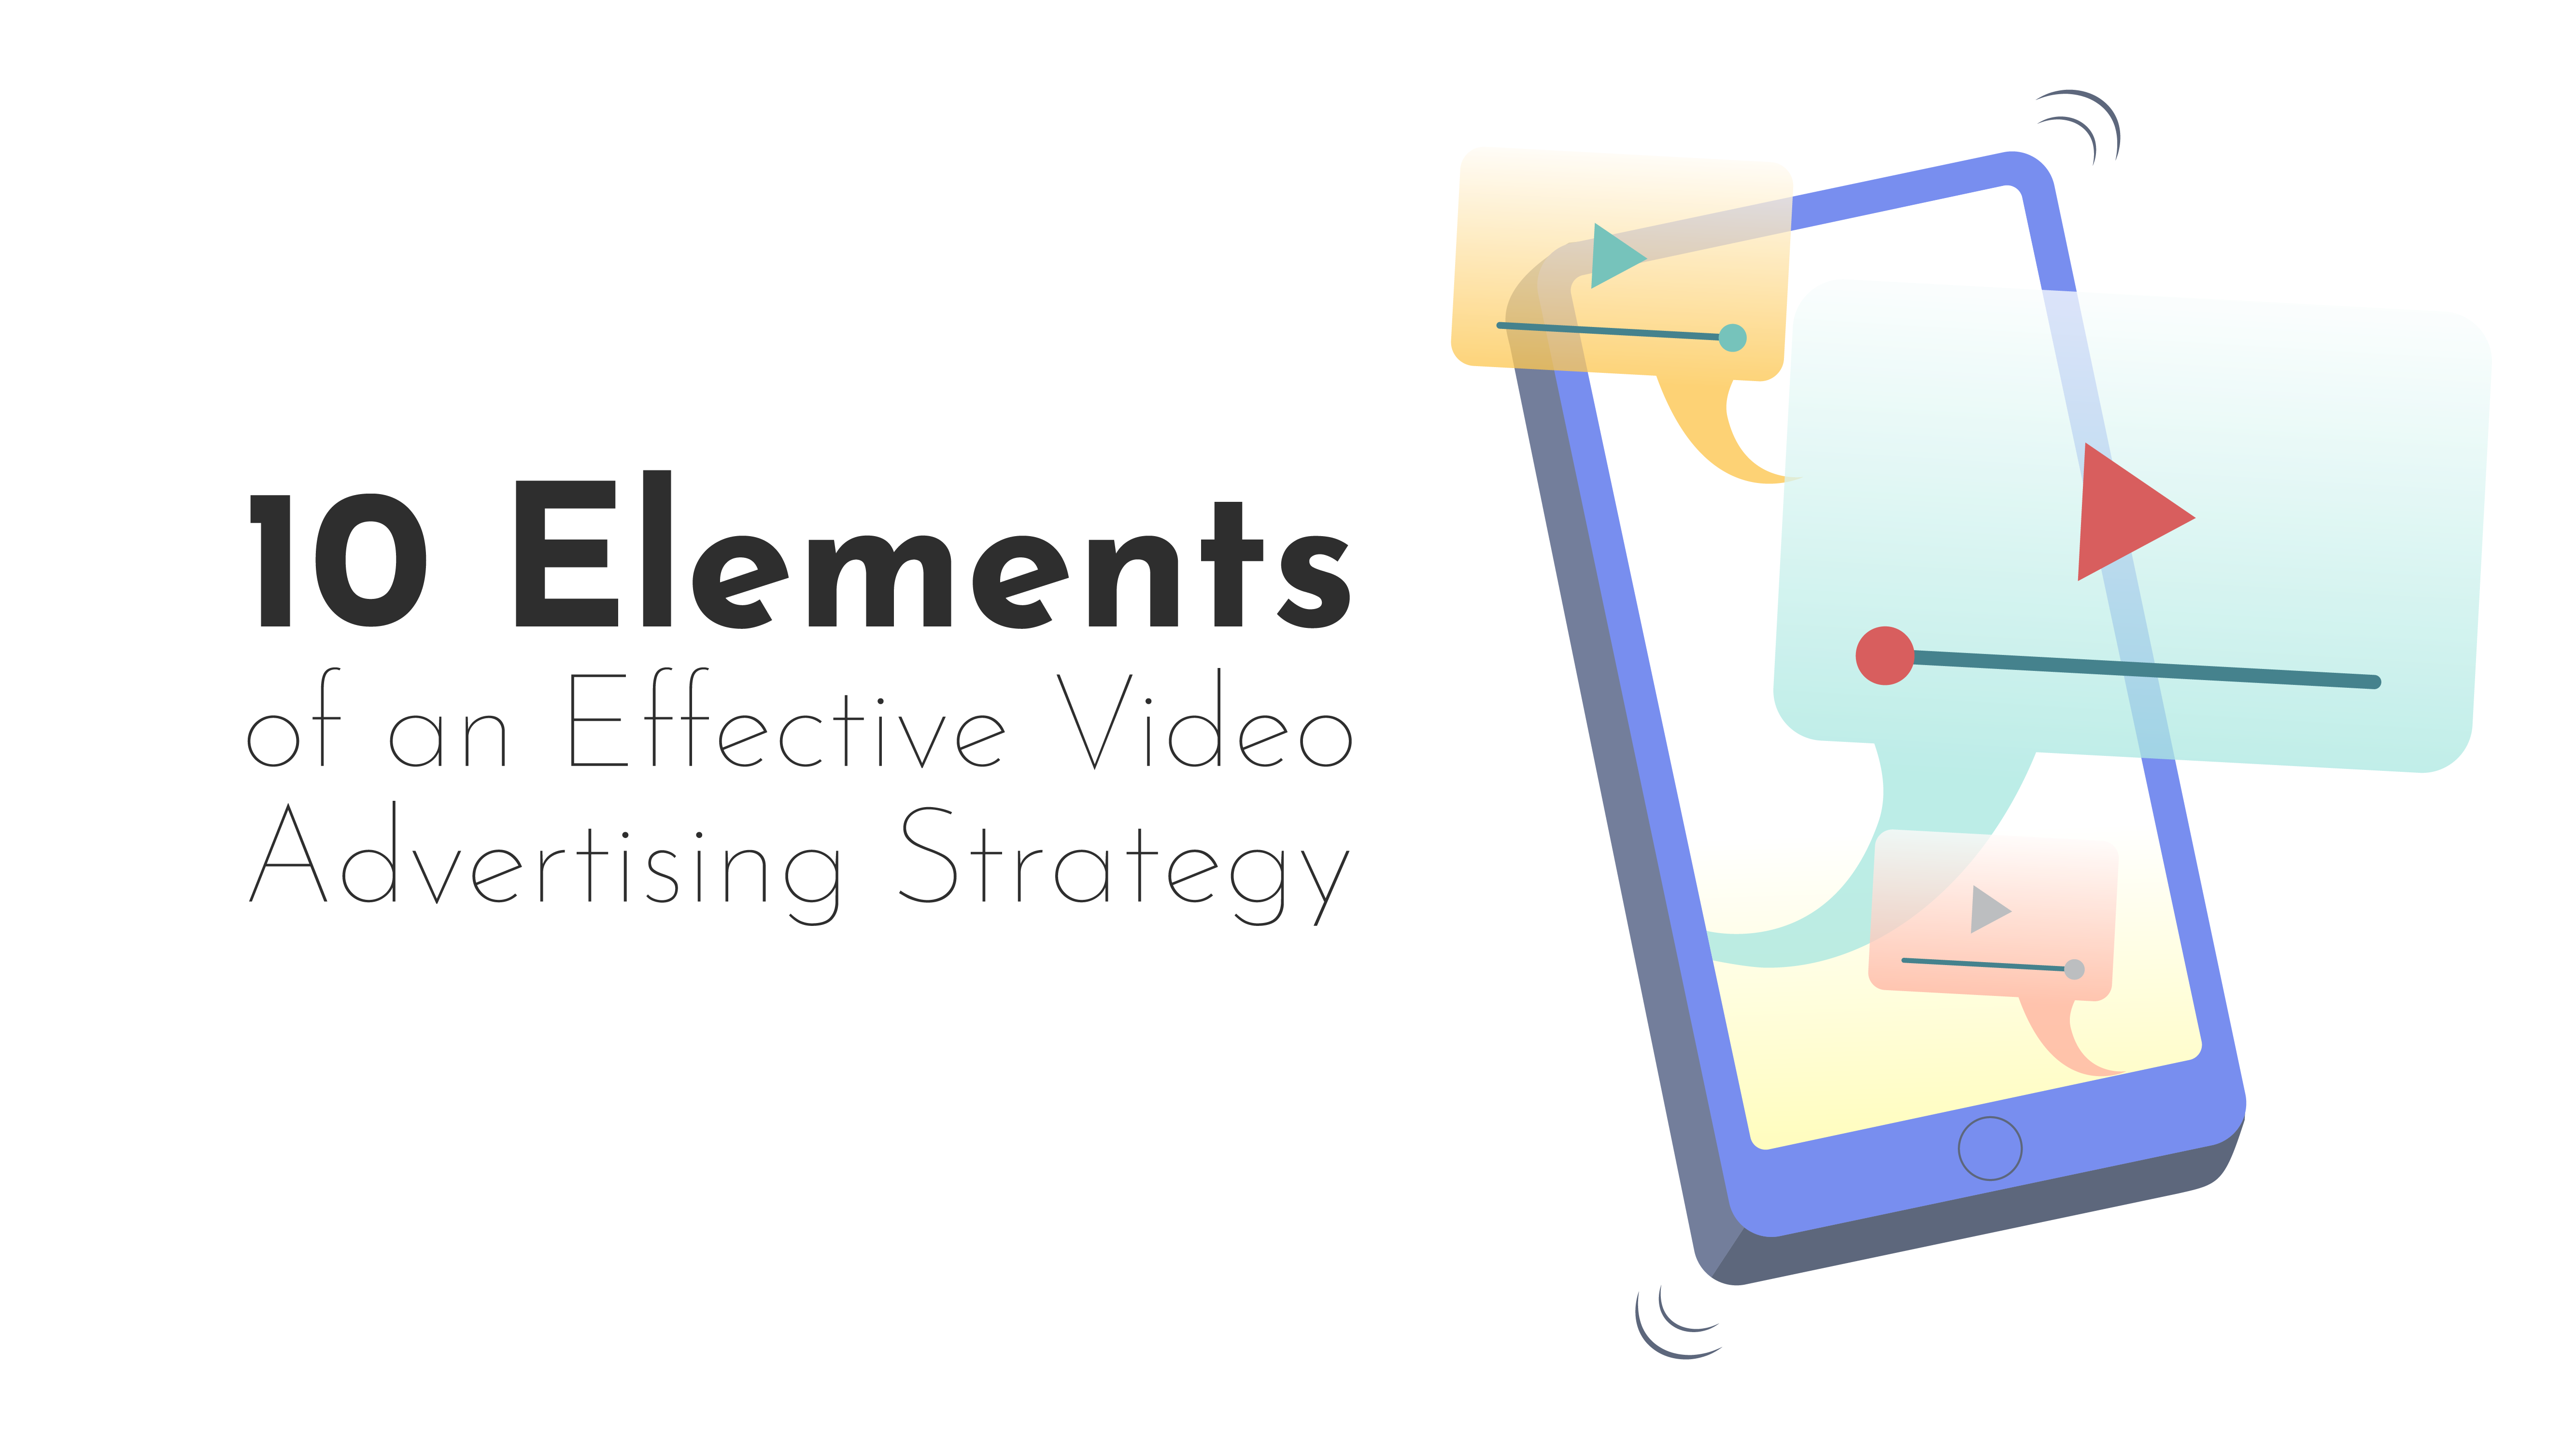 '10 Elements of an Effective Video Strategy' in black, bold font; accompanied by a playful graphic of a phone surrounded by multicolored video players